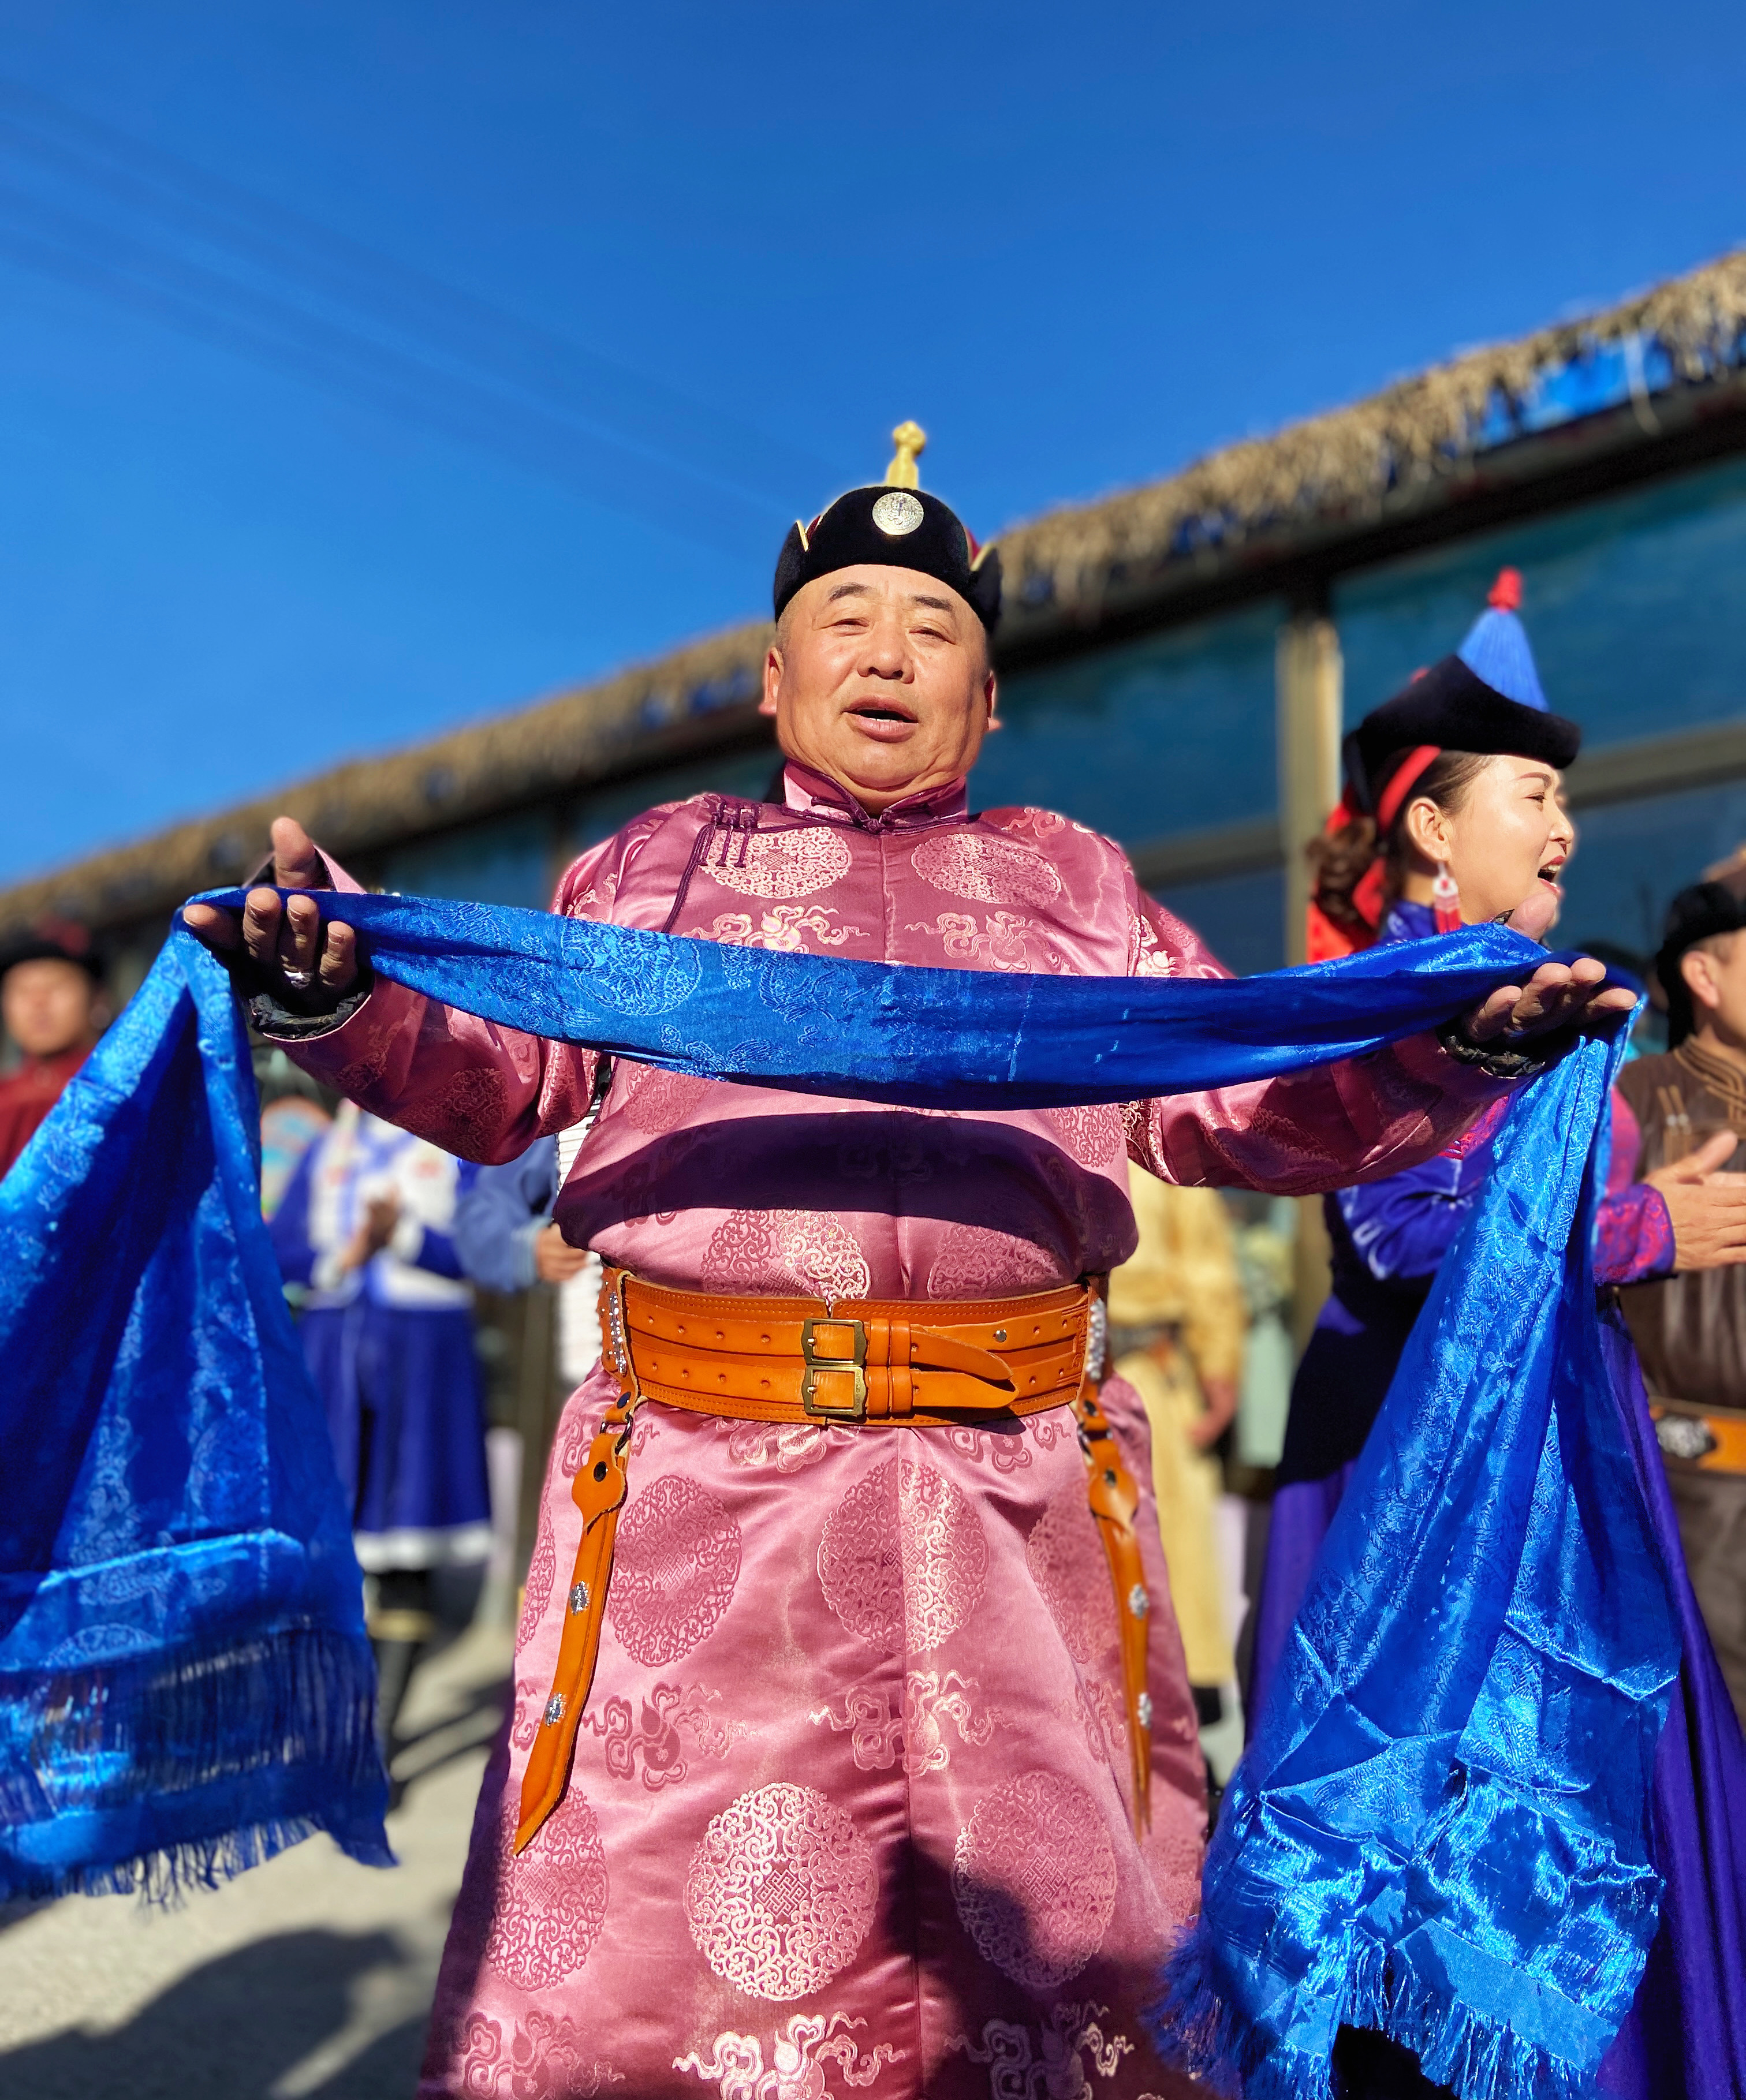 Locals perform in traditional attire to showcase the cultures present in Bogdal Village, Xinjiang. /CGTN